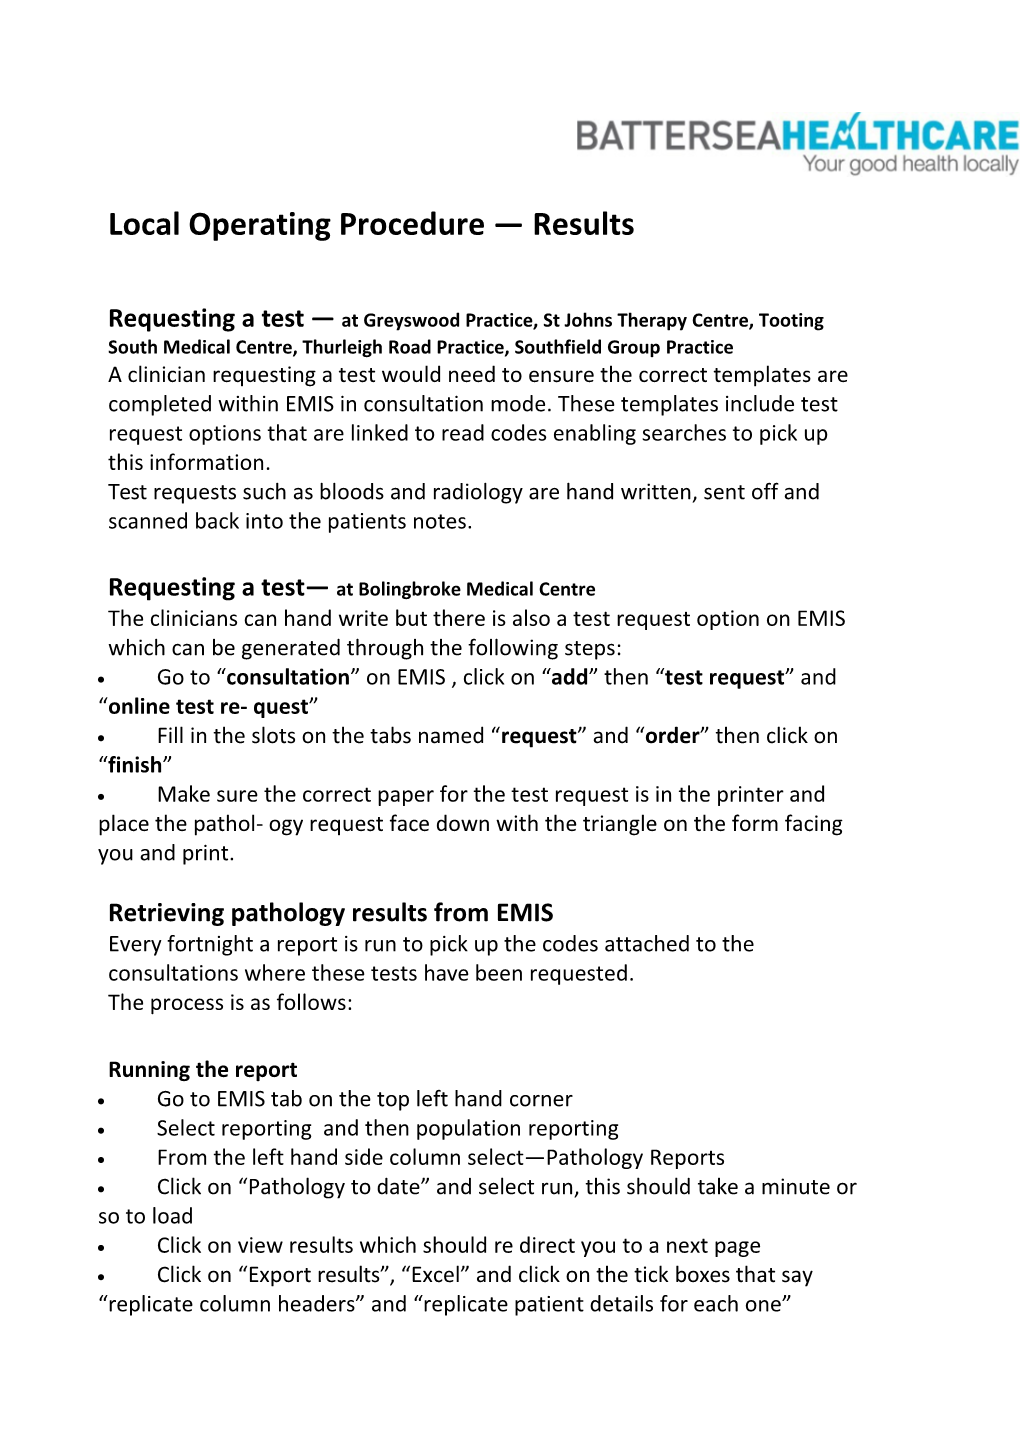 Local Operating Procedure Results